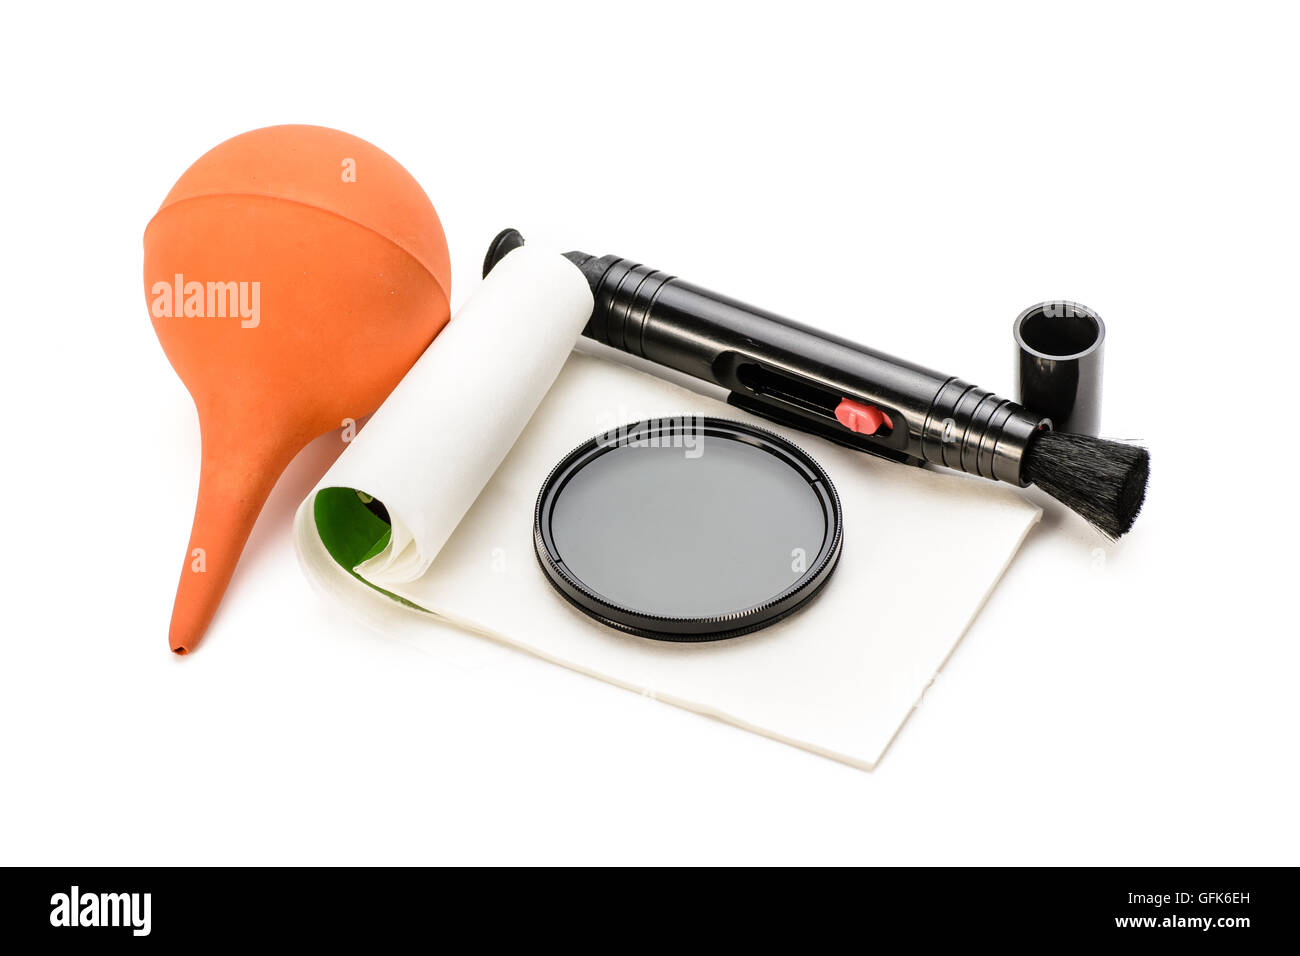 lens cleaning tools on the white background. Stock Photo